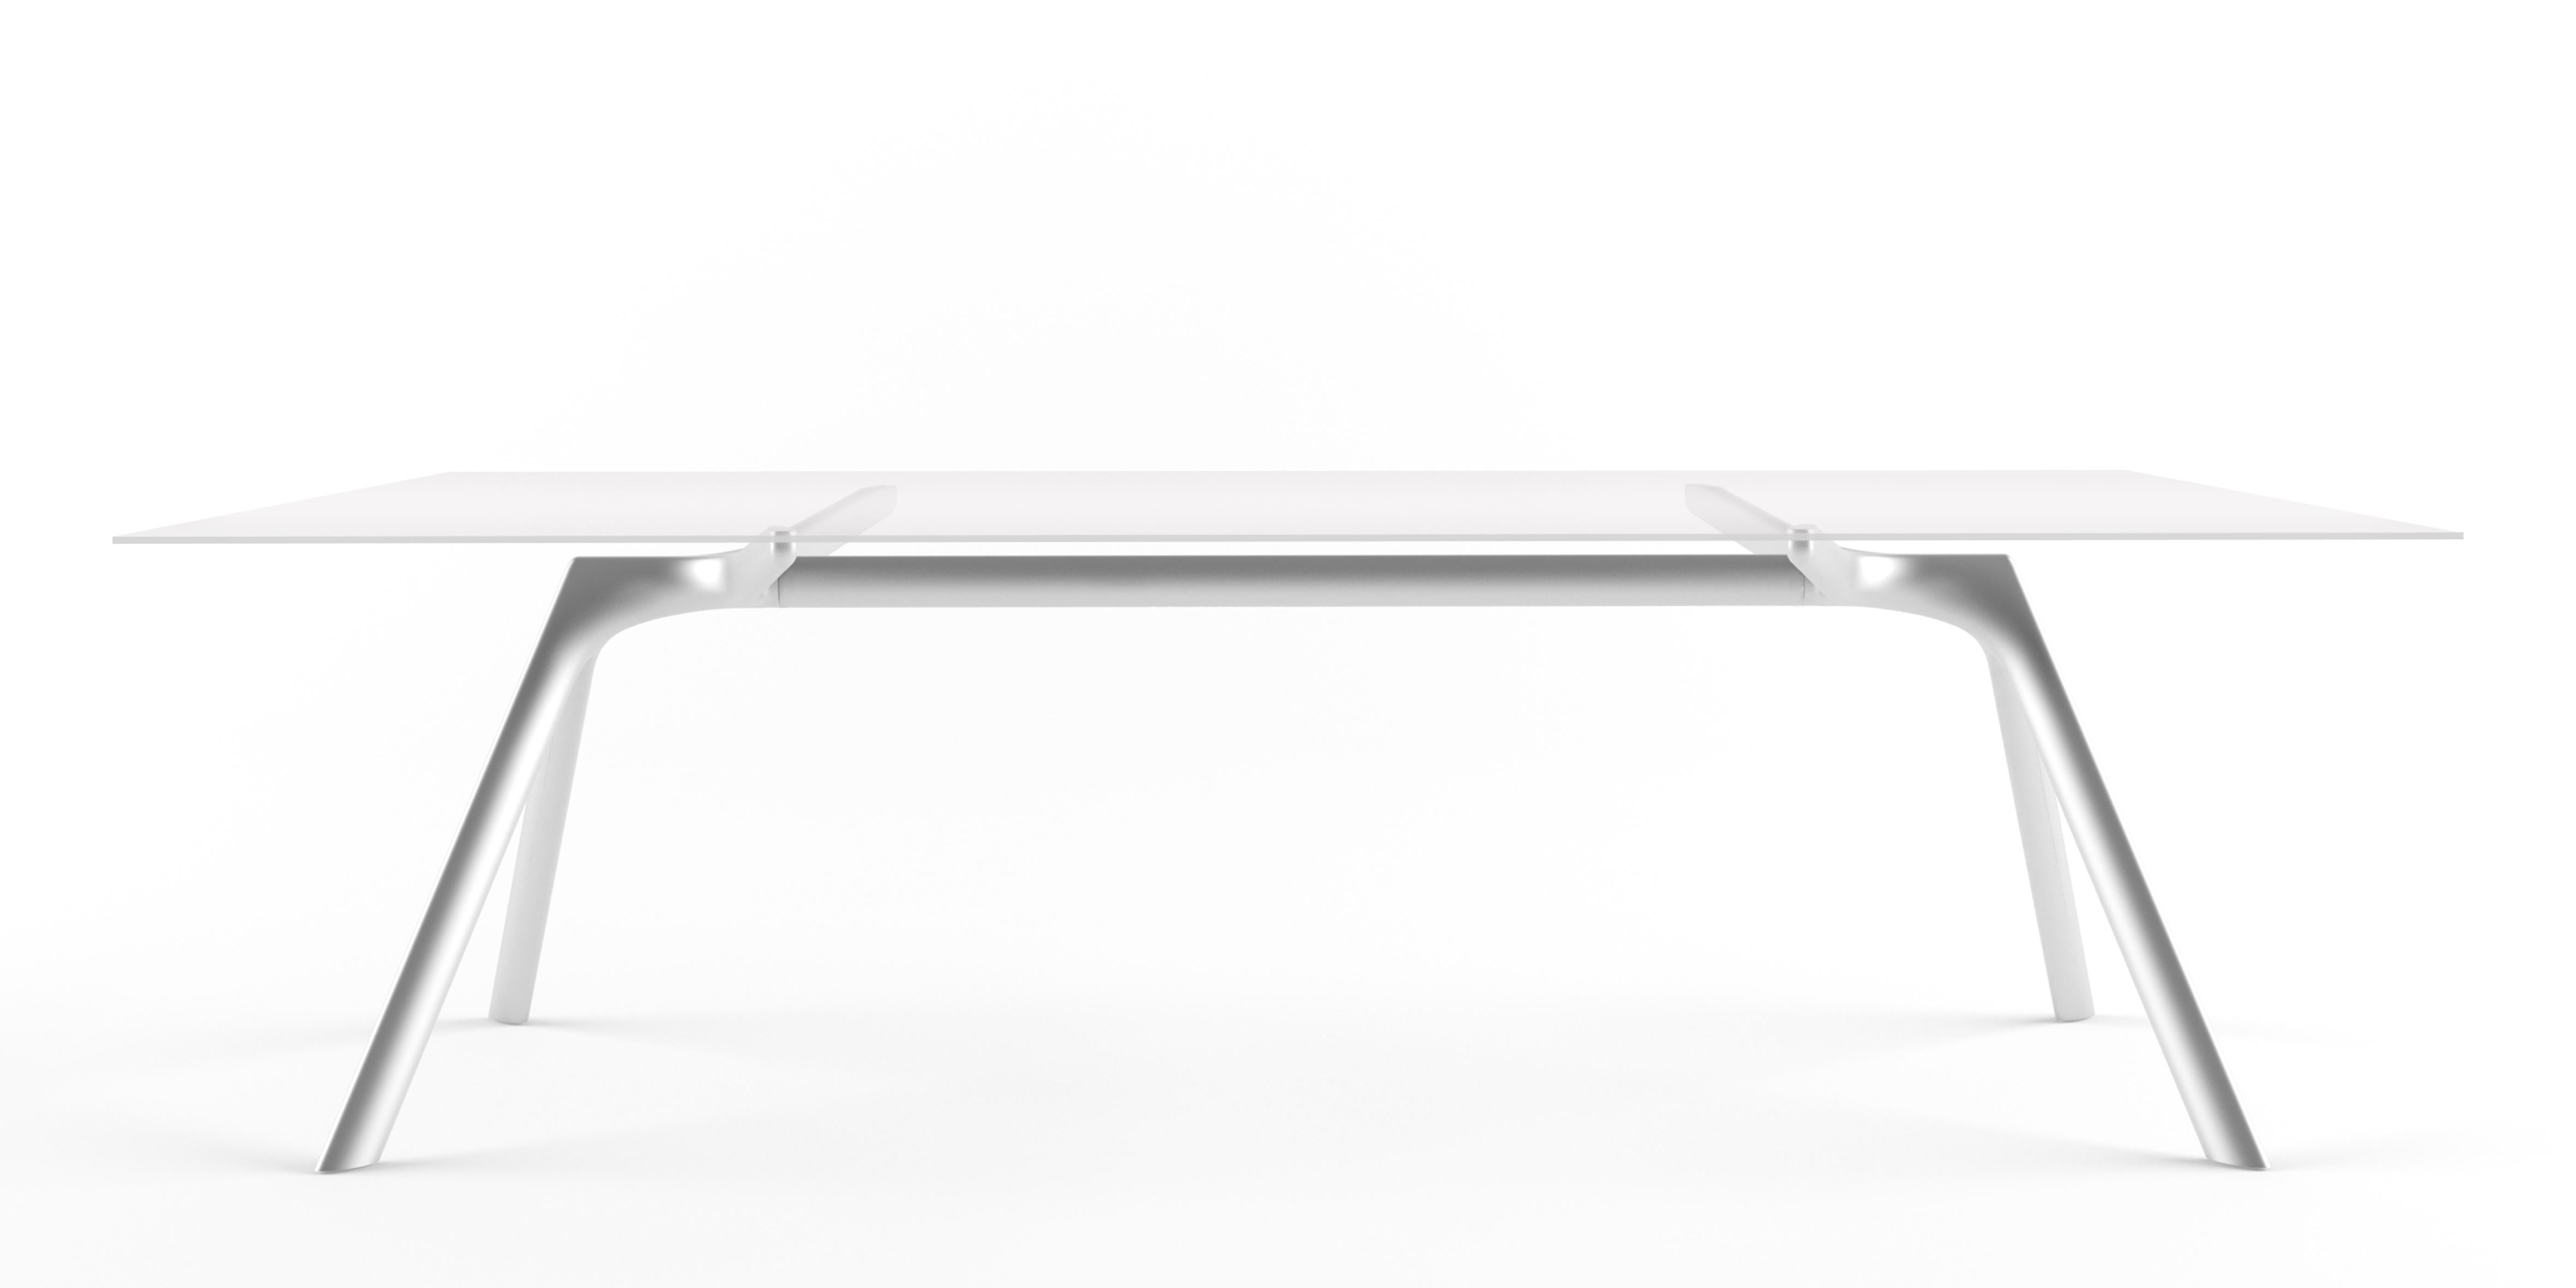 Alias Small Dry 45A Table in Glass Top with Anodised Silver Metallic Lacquered Aluminium Frame by Alberto Meda

Table with structure made of lacquered aluminium elements. Top in extra light tempered glass, thickness 10 mm. Available with